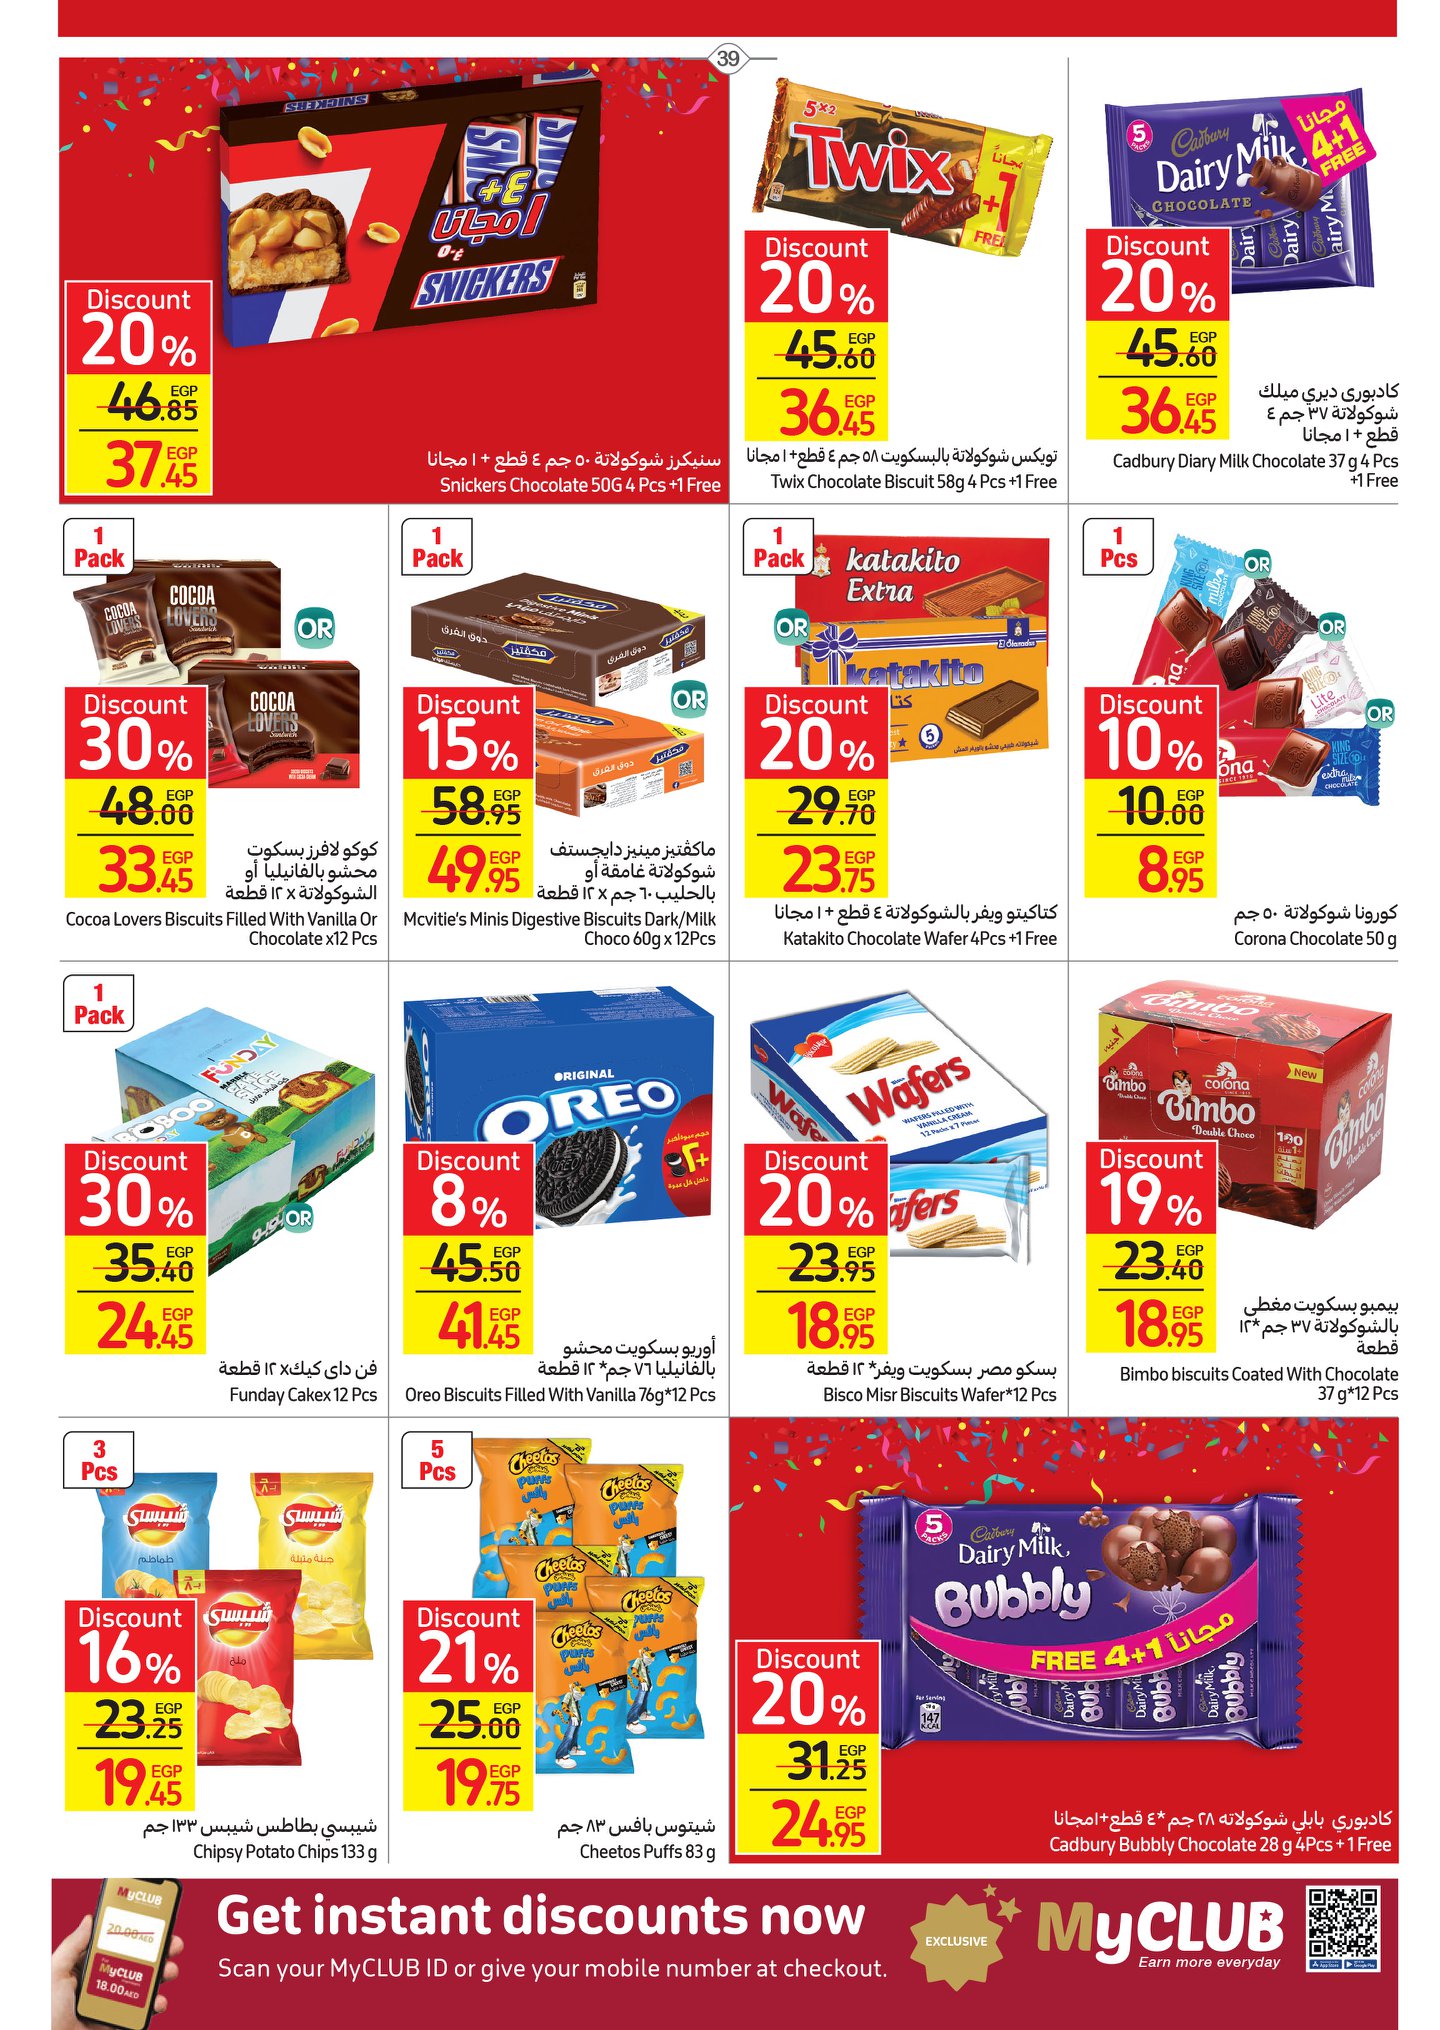 Carrefour magazine offers complete with 50% discounts and a surprise purchase in convenient installments without interest 45